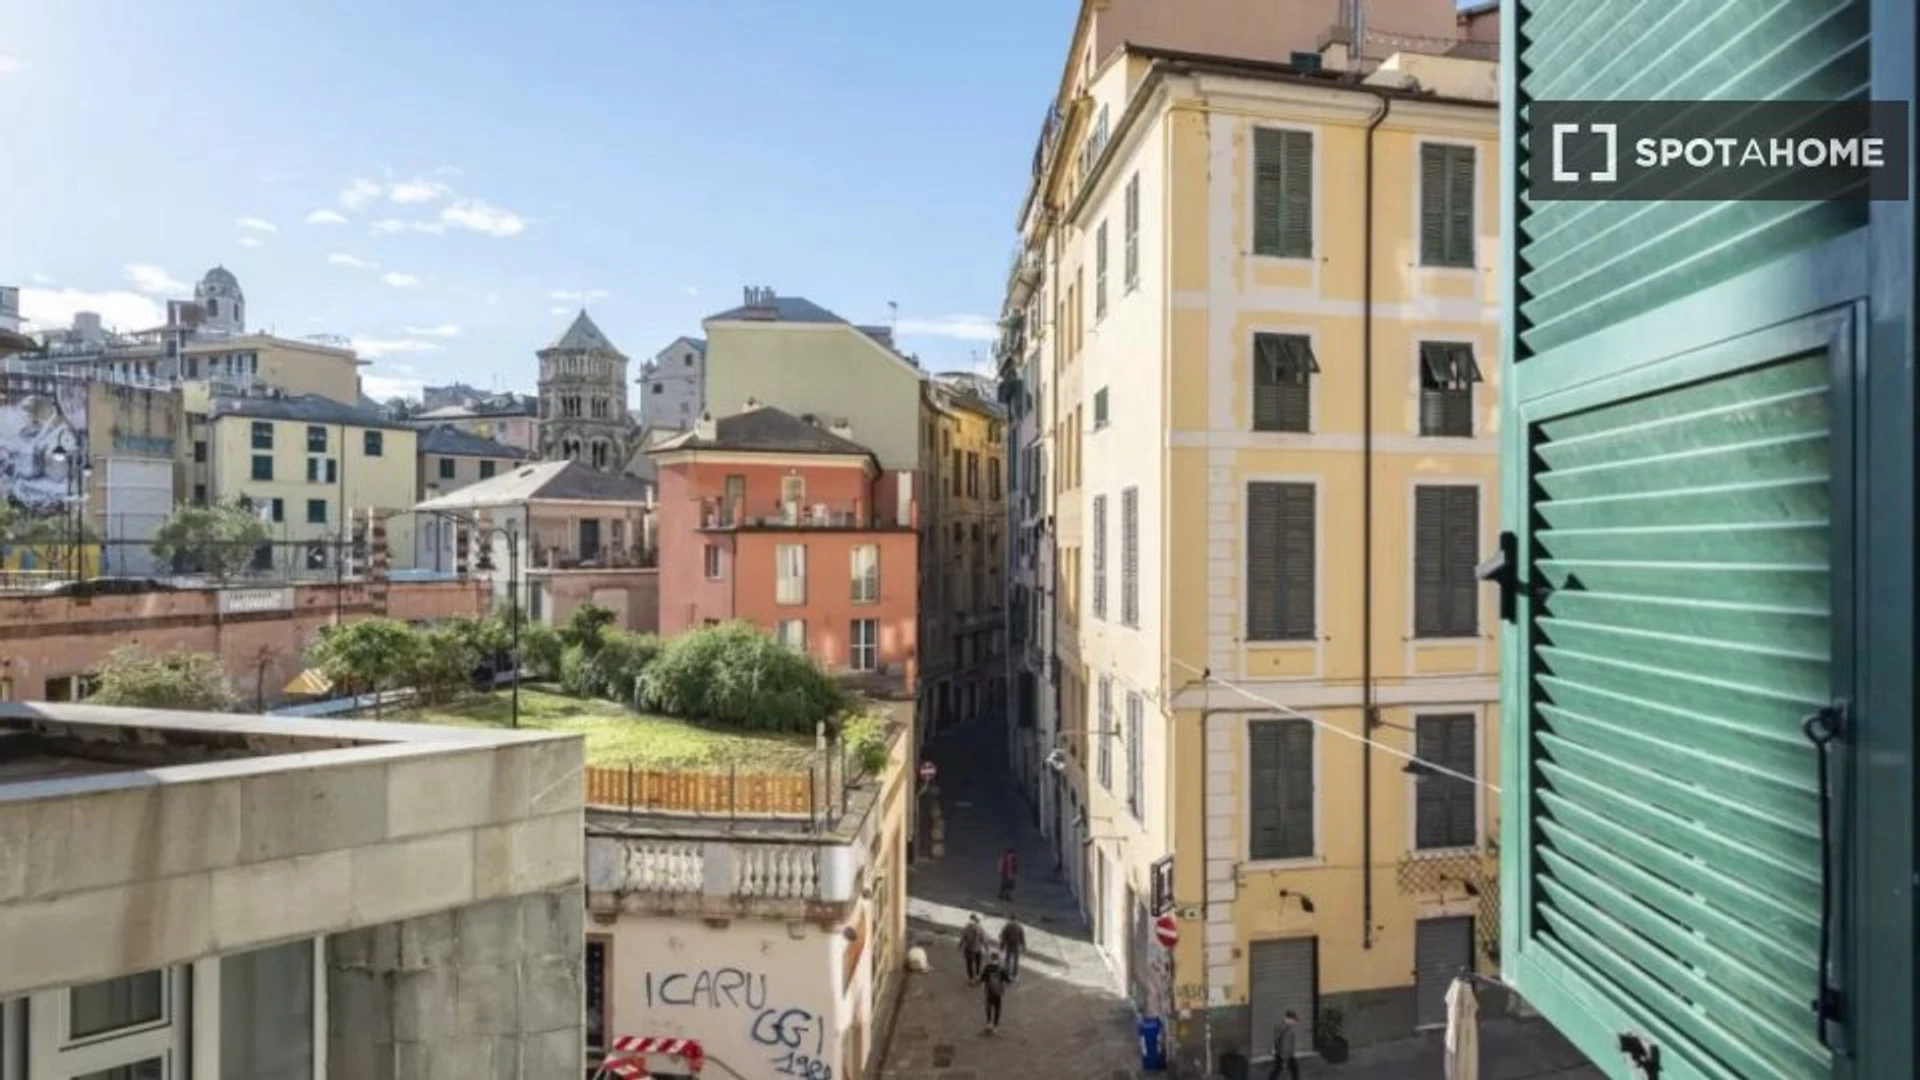 Accommodation in the centre of Genoa